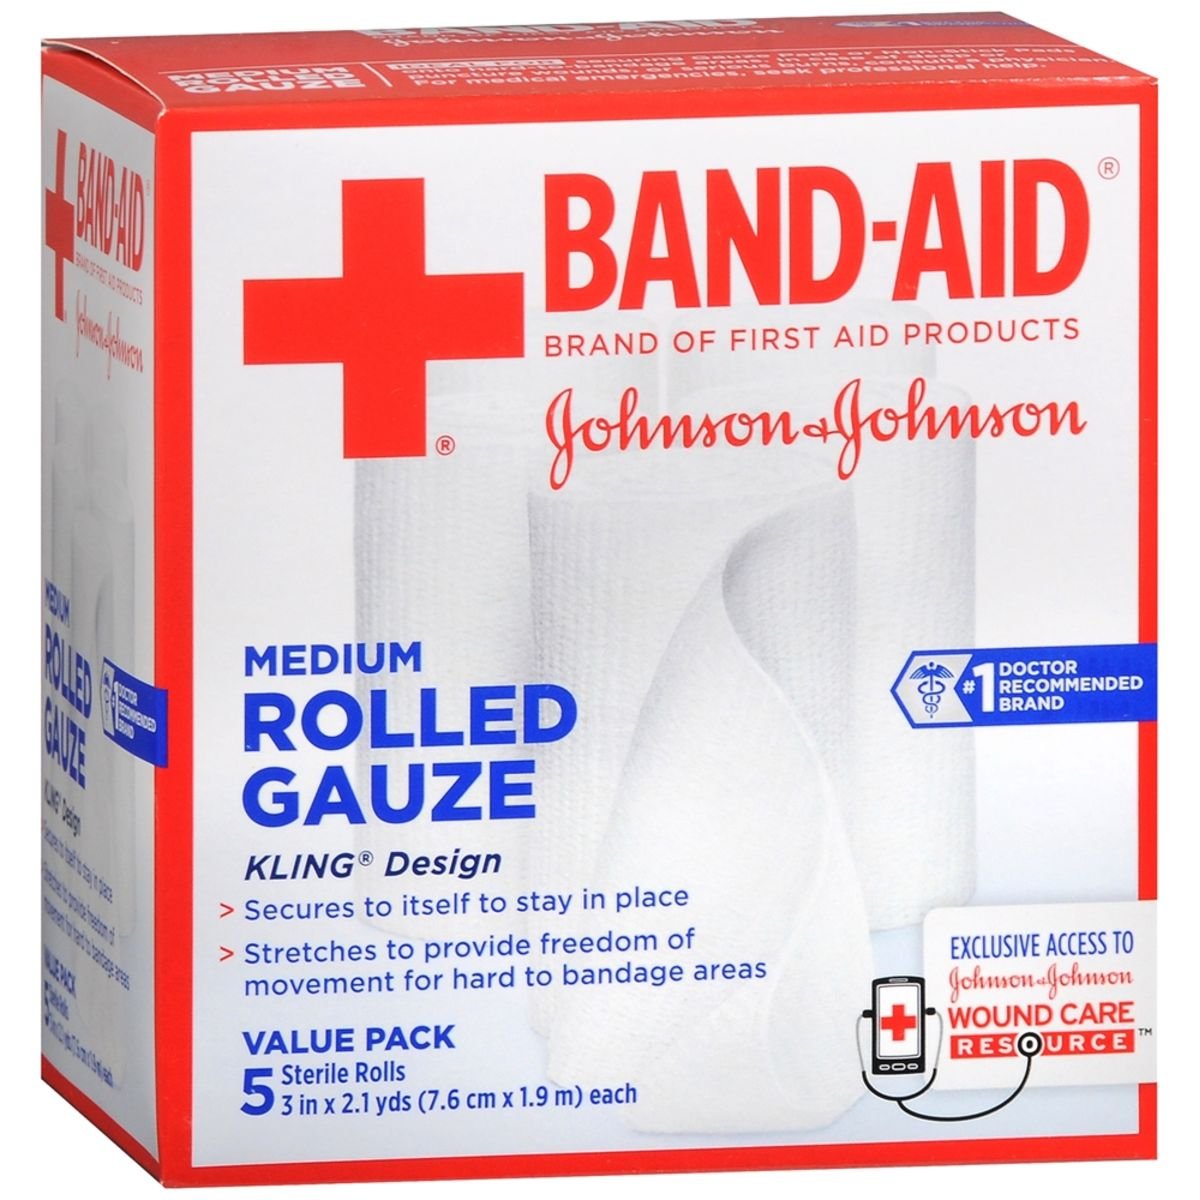 Buy Rexall Fabric Bandages Assorted Value Pack at